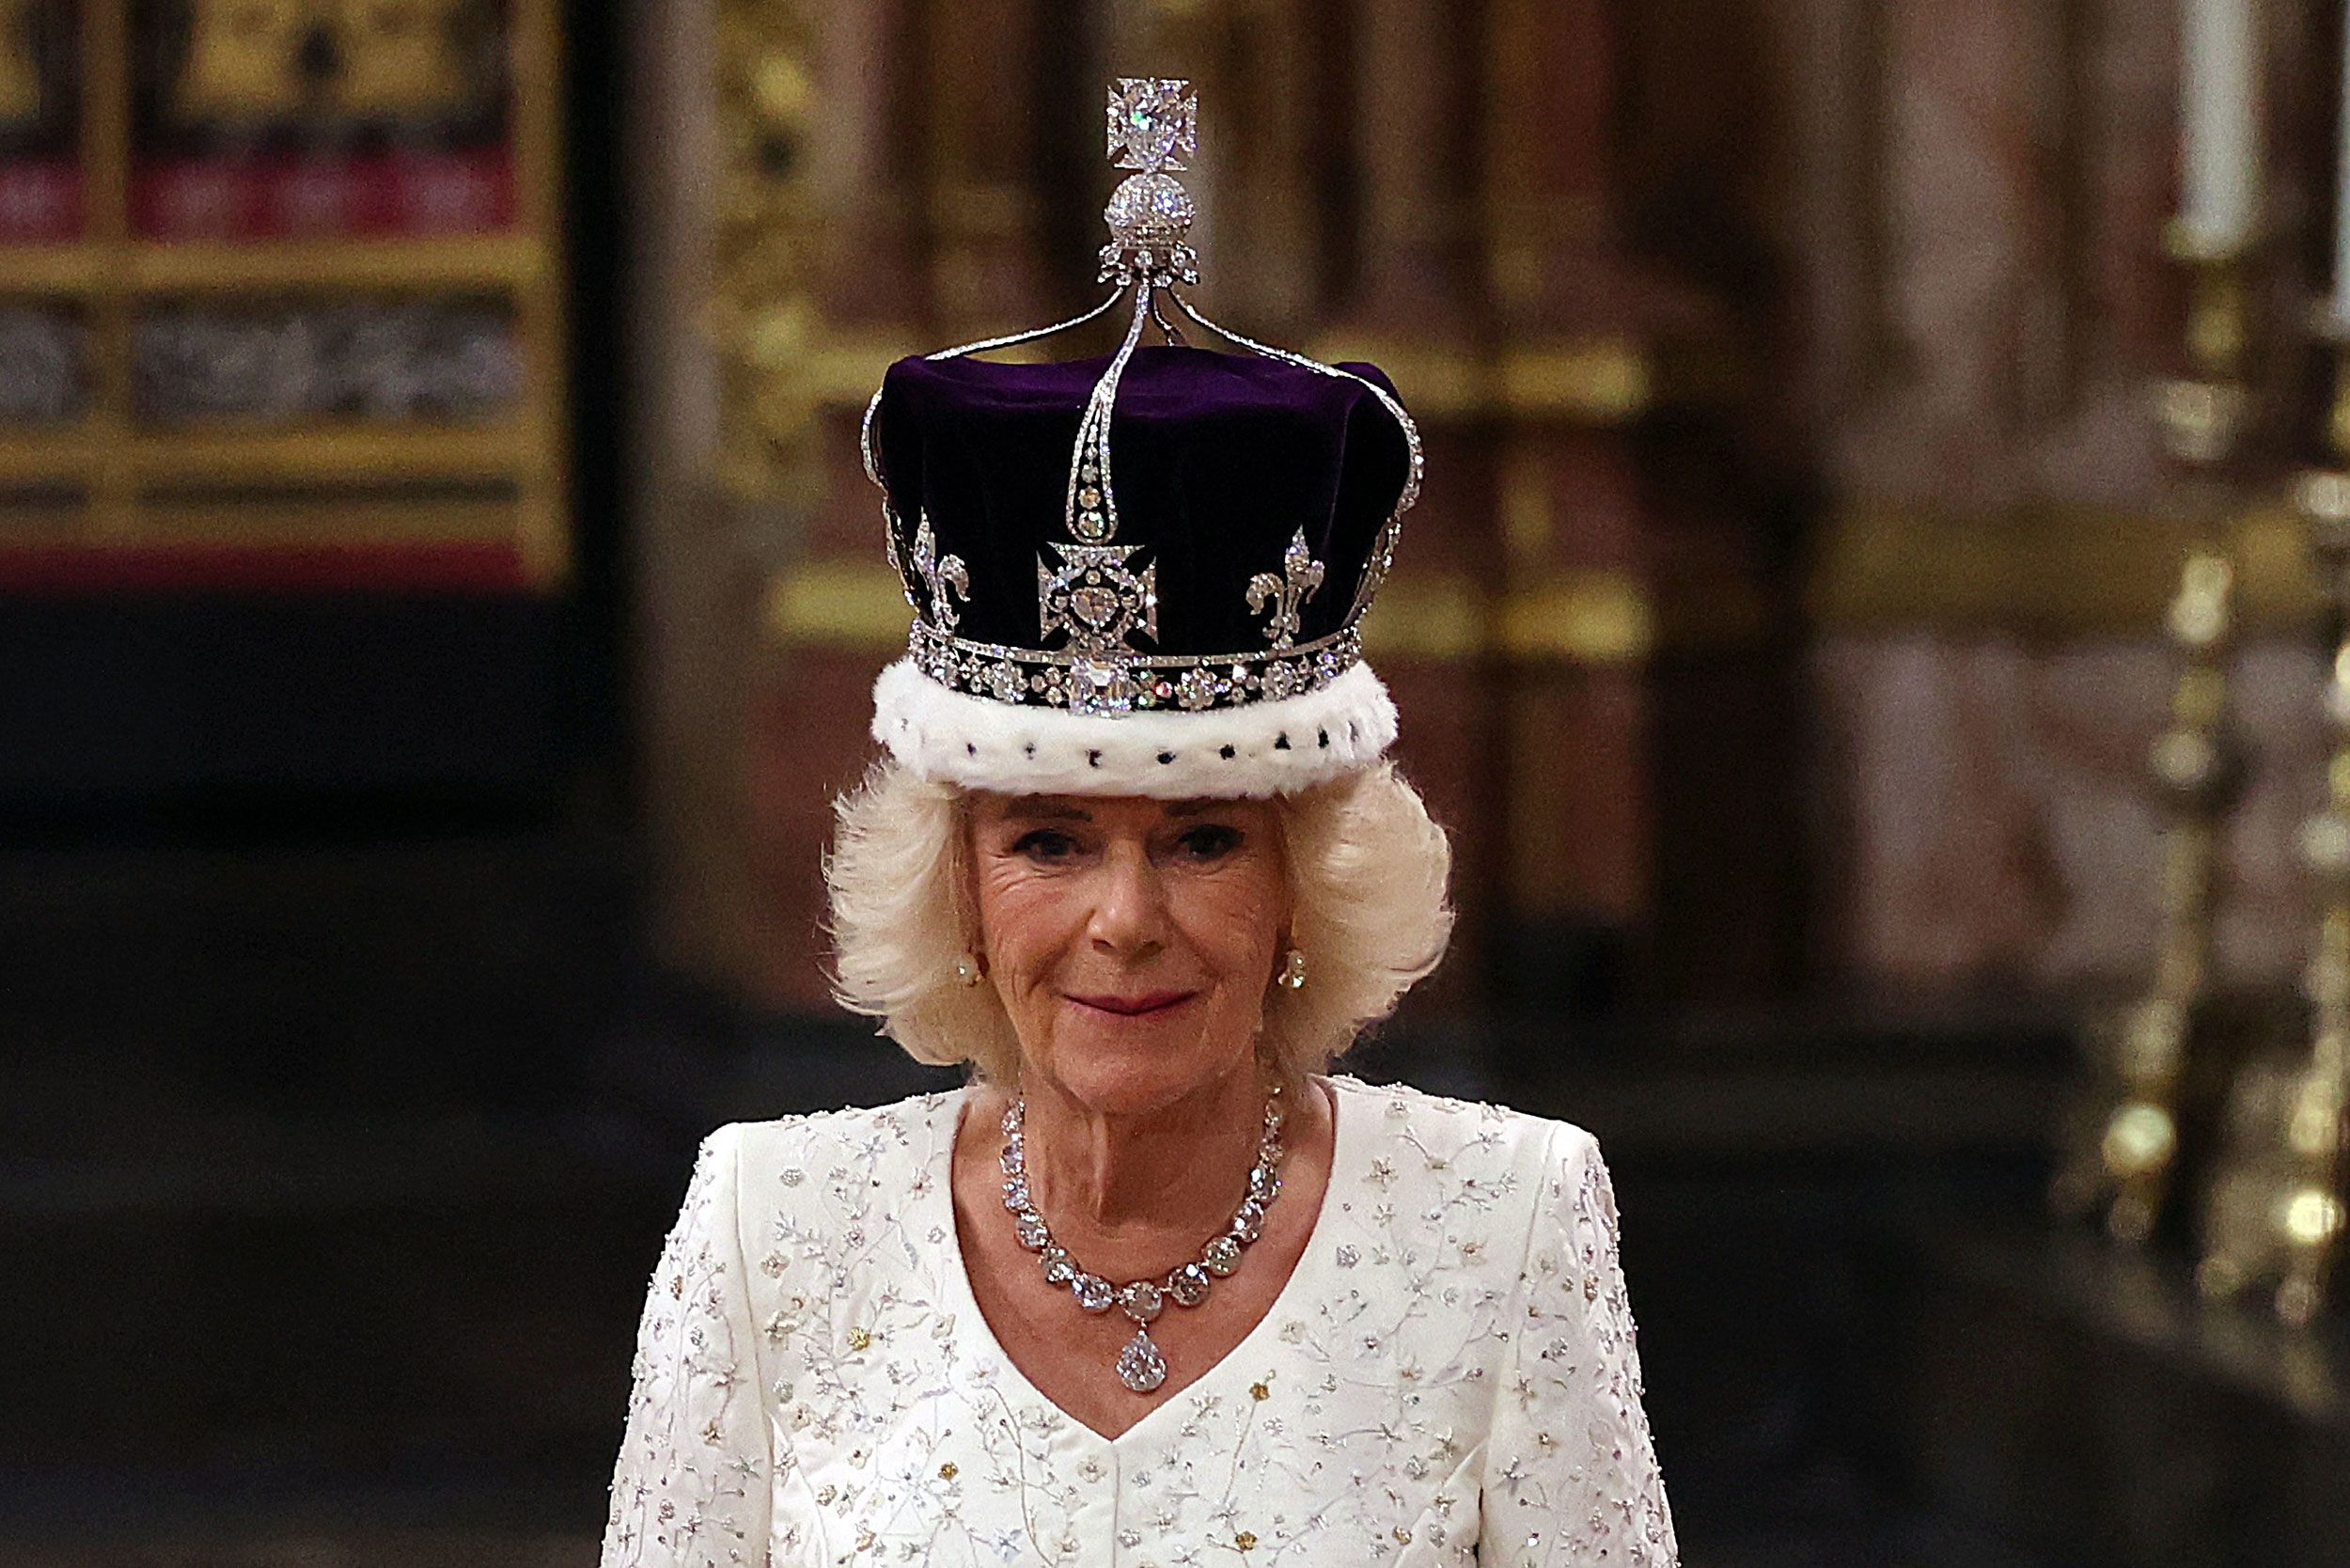 Queen Camilla wearing a white outfit and royal crown